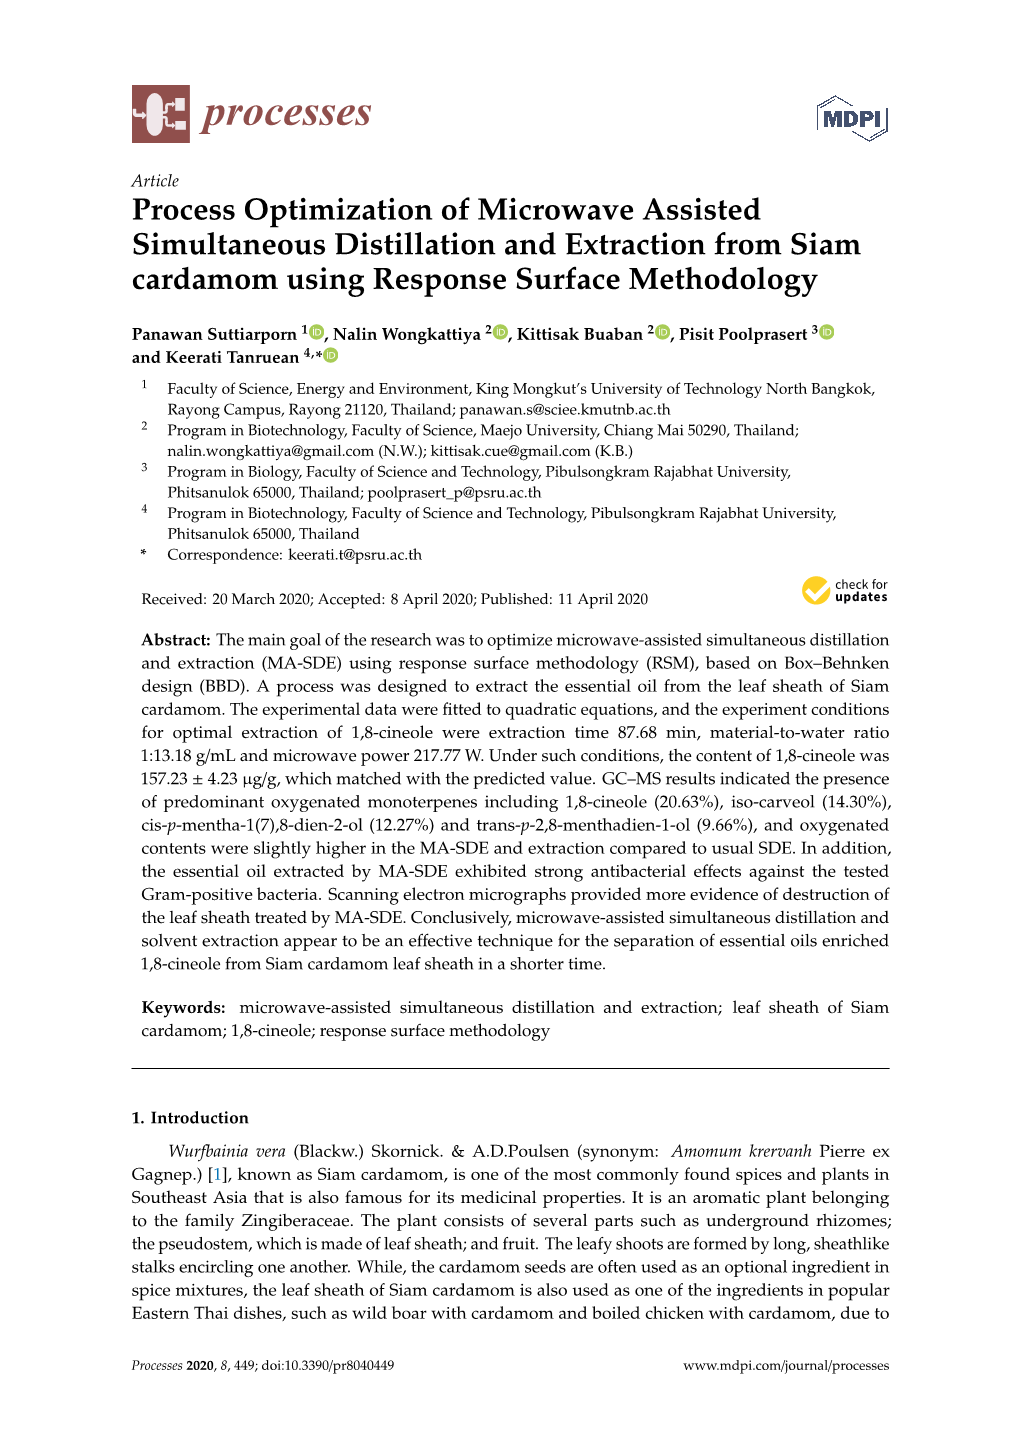 Process Optimization of Microwave Assisted Simultaneous Distillation and Extraction from Siam Cardamom Using Response Surface Methodology